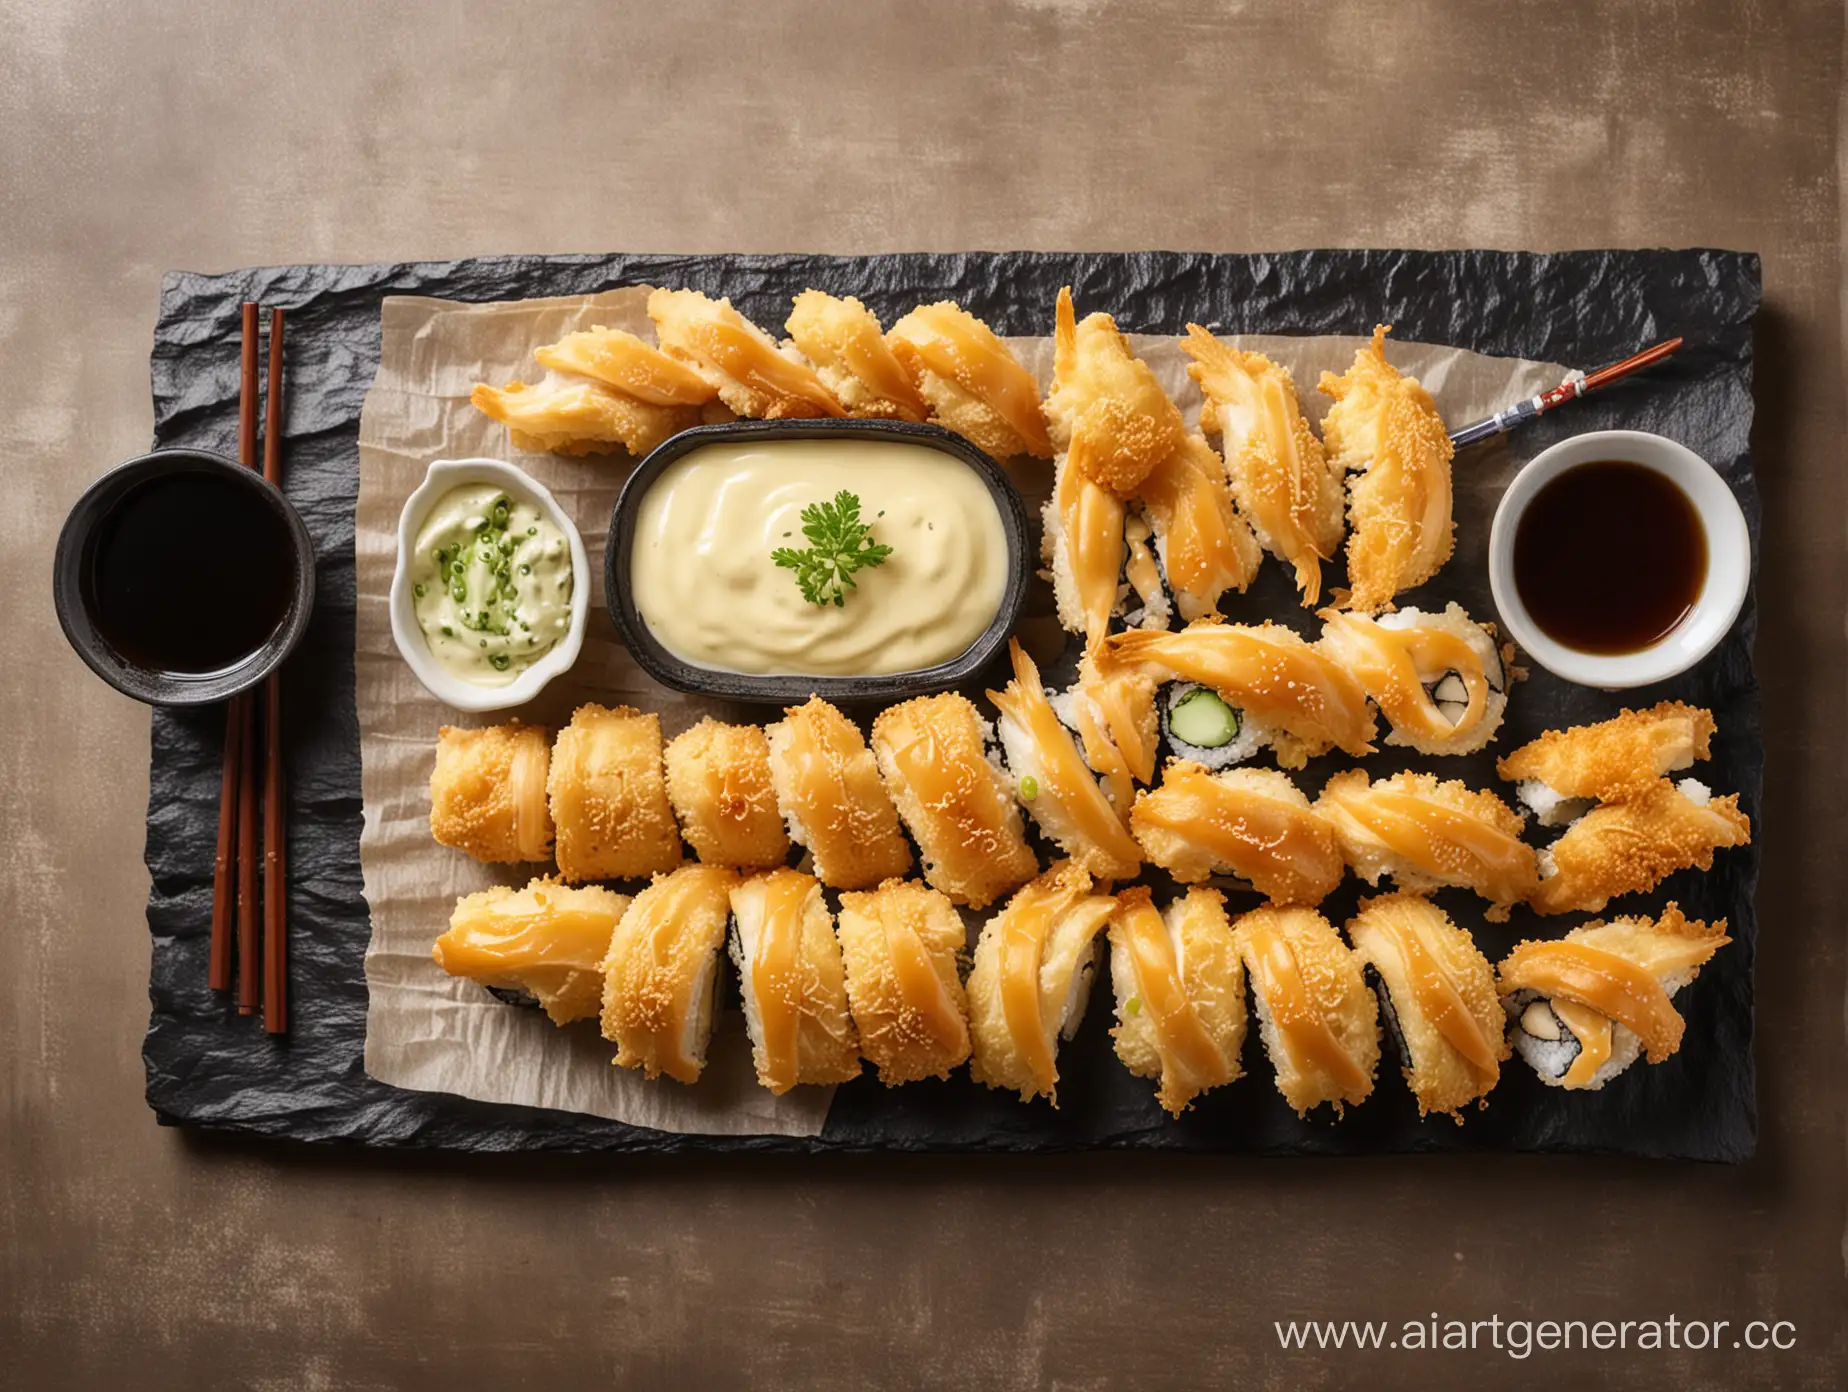 Assorted-Sushi-Set-with-Baked-Tempura-and-Cheese-Sauce